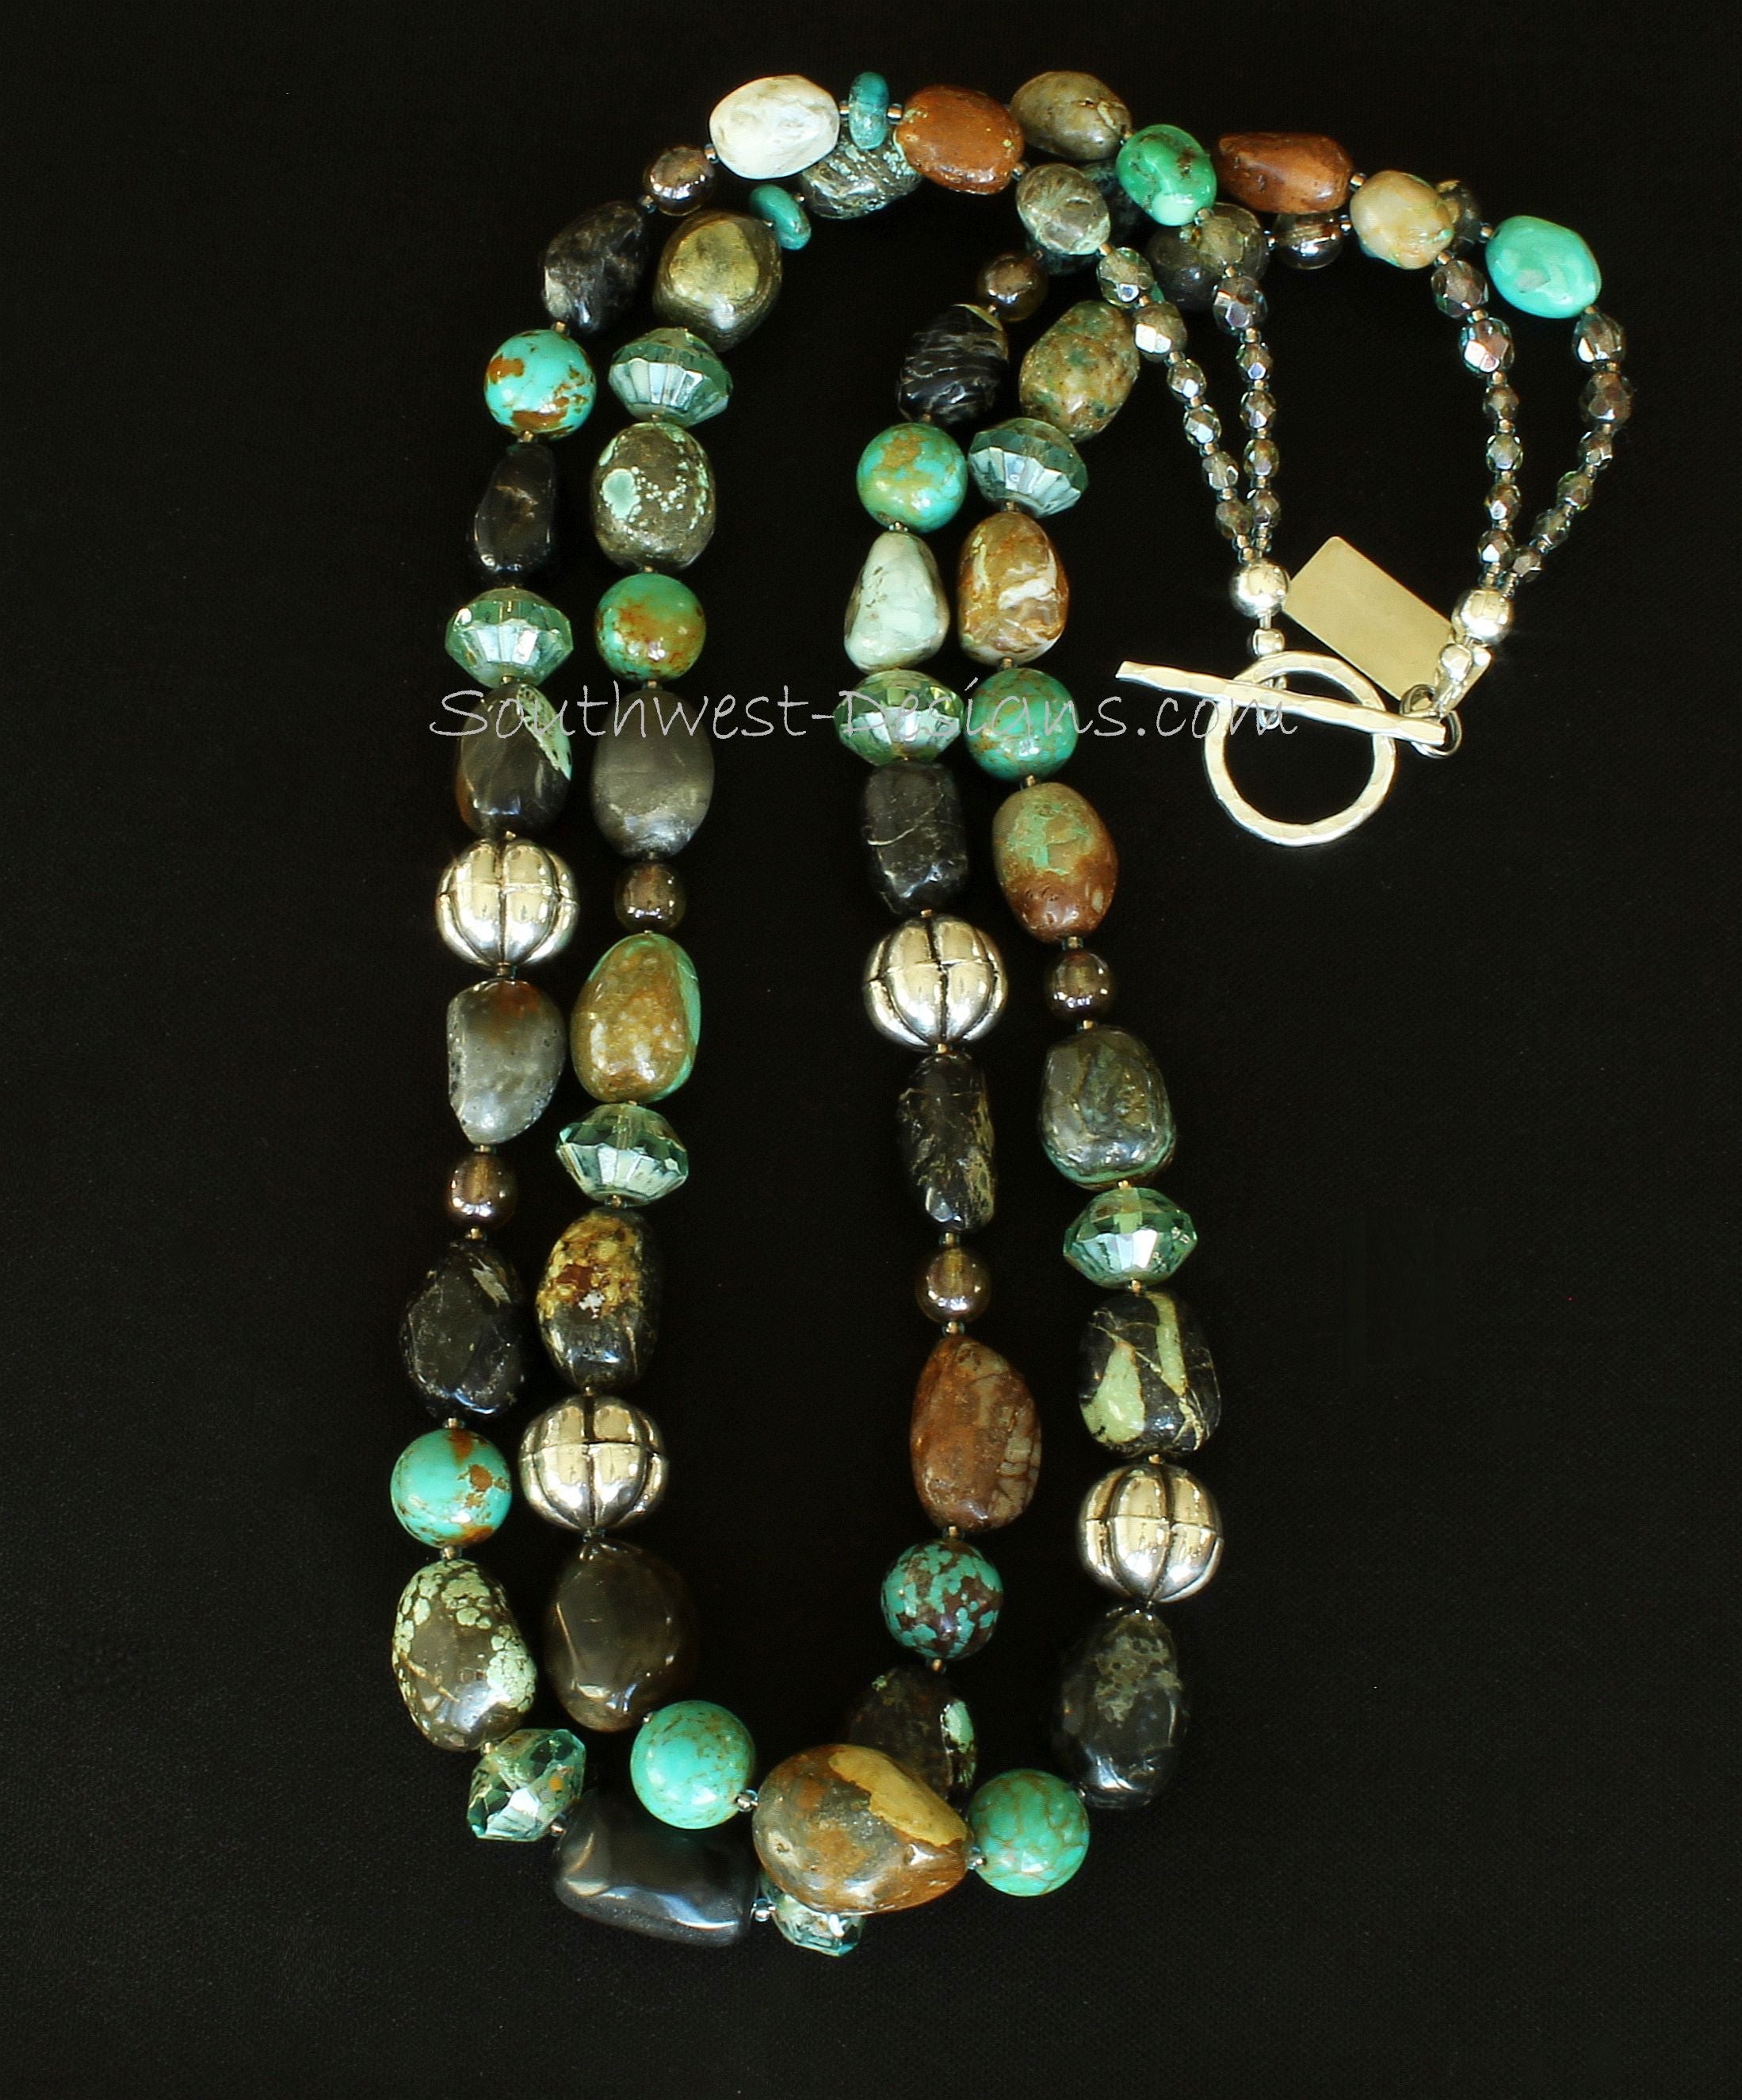 Turquoise Fossilized Clam Shell Necklace with Turquoise and Sterling Silver